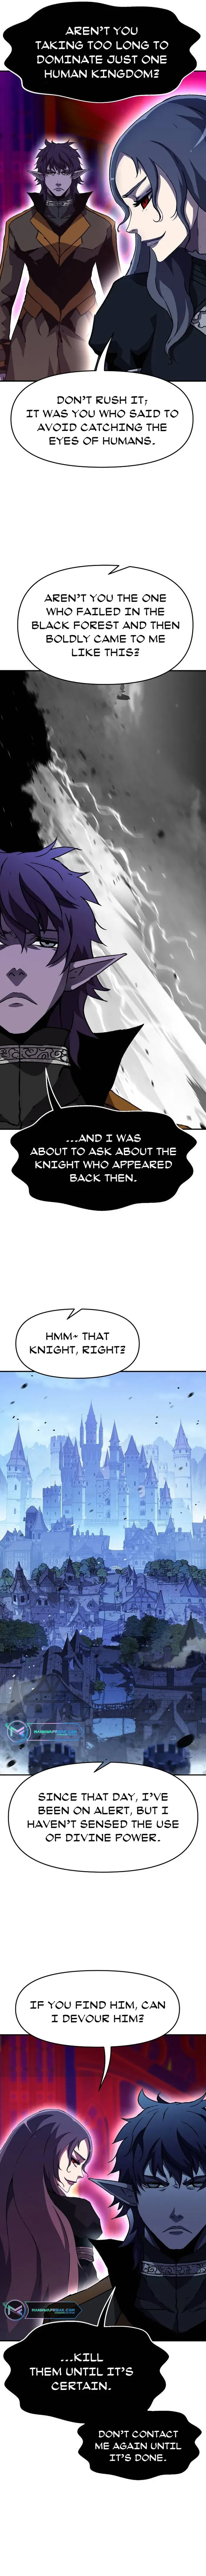 I BECAME A TERMINALLY-ILL KNIGHT Chapter 25 page 3